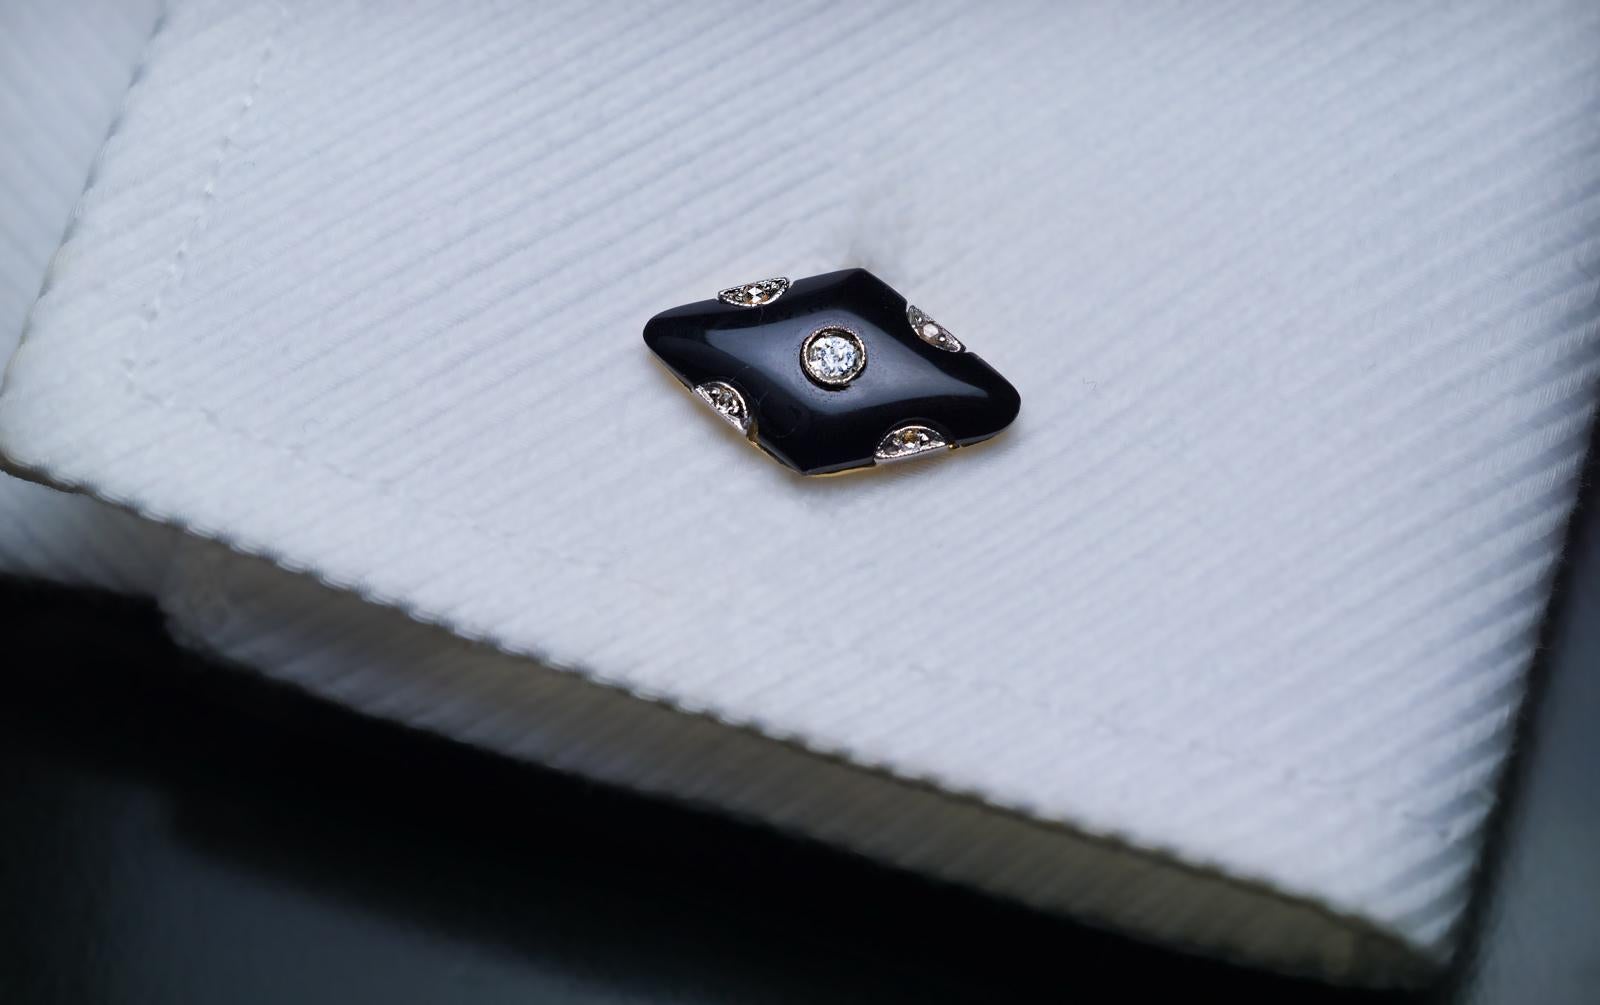 1920s

A pair of stylish Art Deco double sided cufflinks is crafted in 18K gold and platinum. The cufflinks are set with rhombus-shaped carved black onyx panels with smooth edges accented by old mine and rose cut diamonds. The diamonds are set in